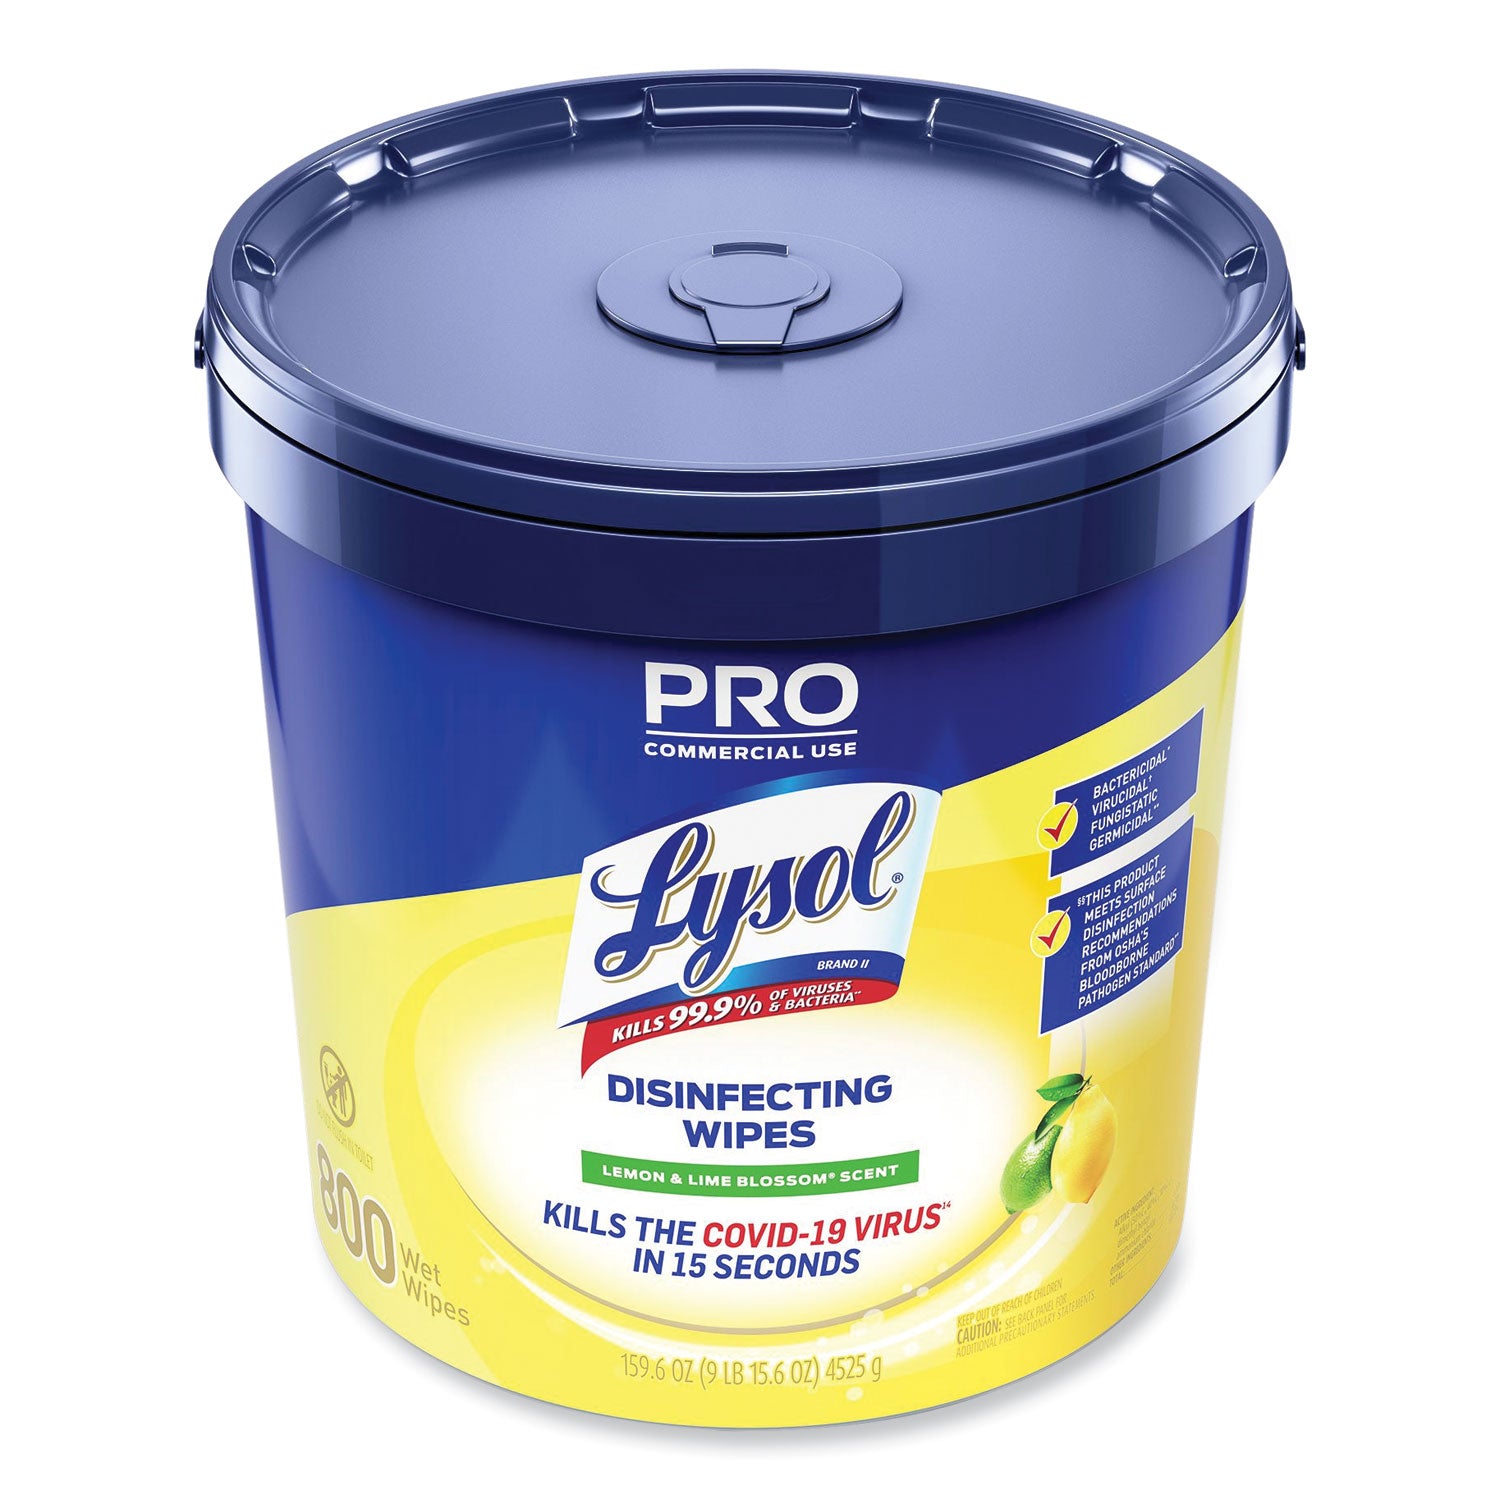 professional-disinfecting-wipe-bucket-1-ply-6-x-8-lemon-and-lime-blossom-white-800-wipes-bucket-2-buckets-carton_rac99856ct - 4